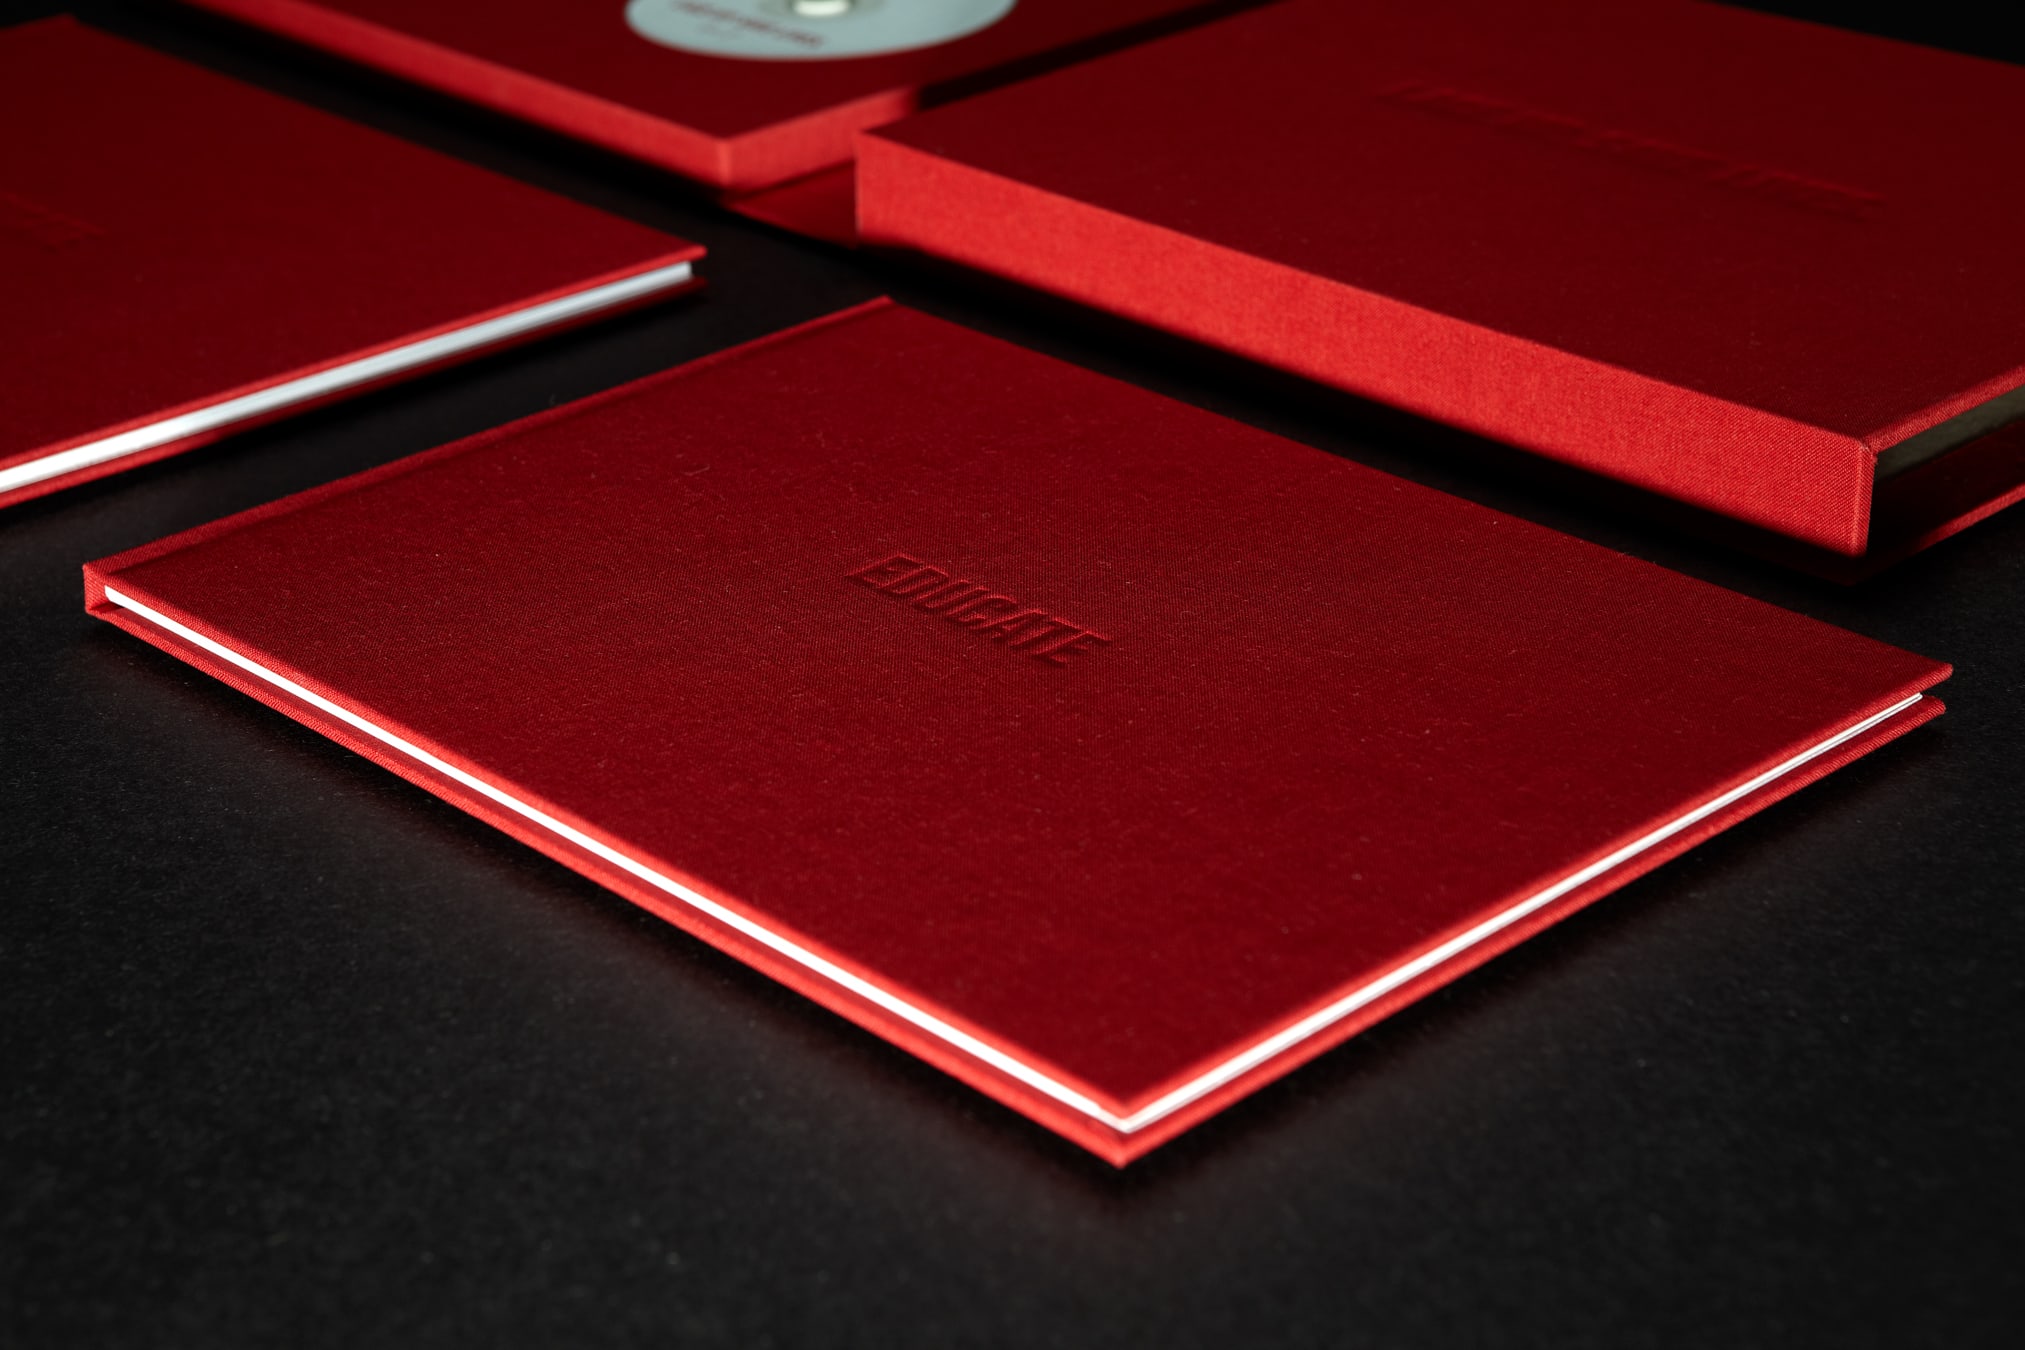 NIKE Red book design cover detail